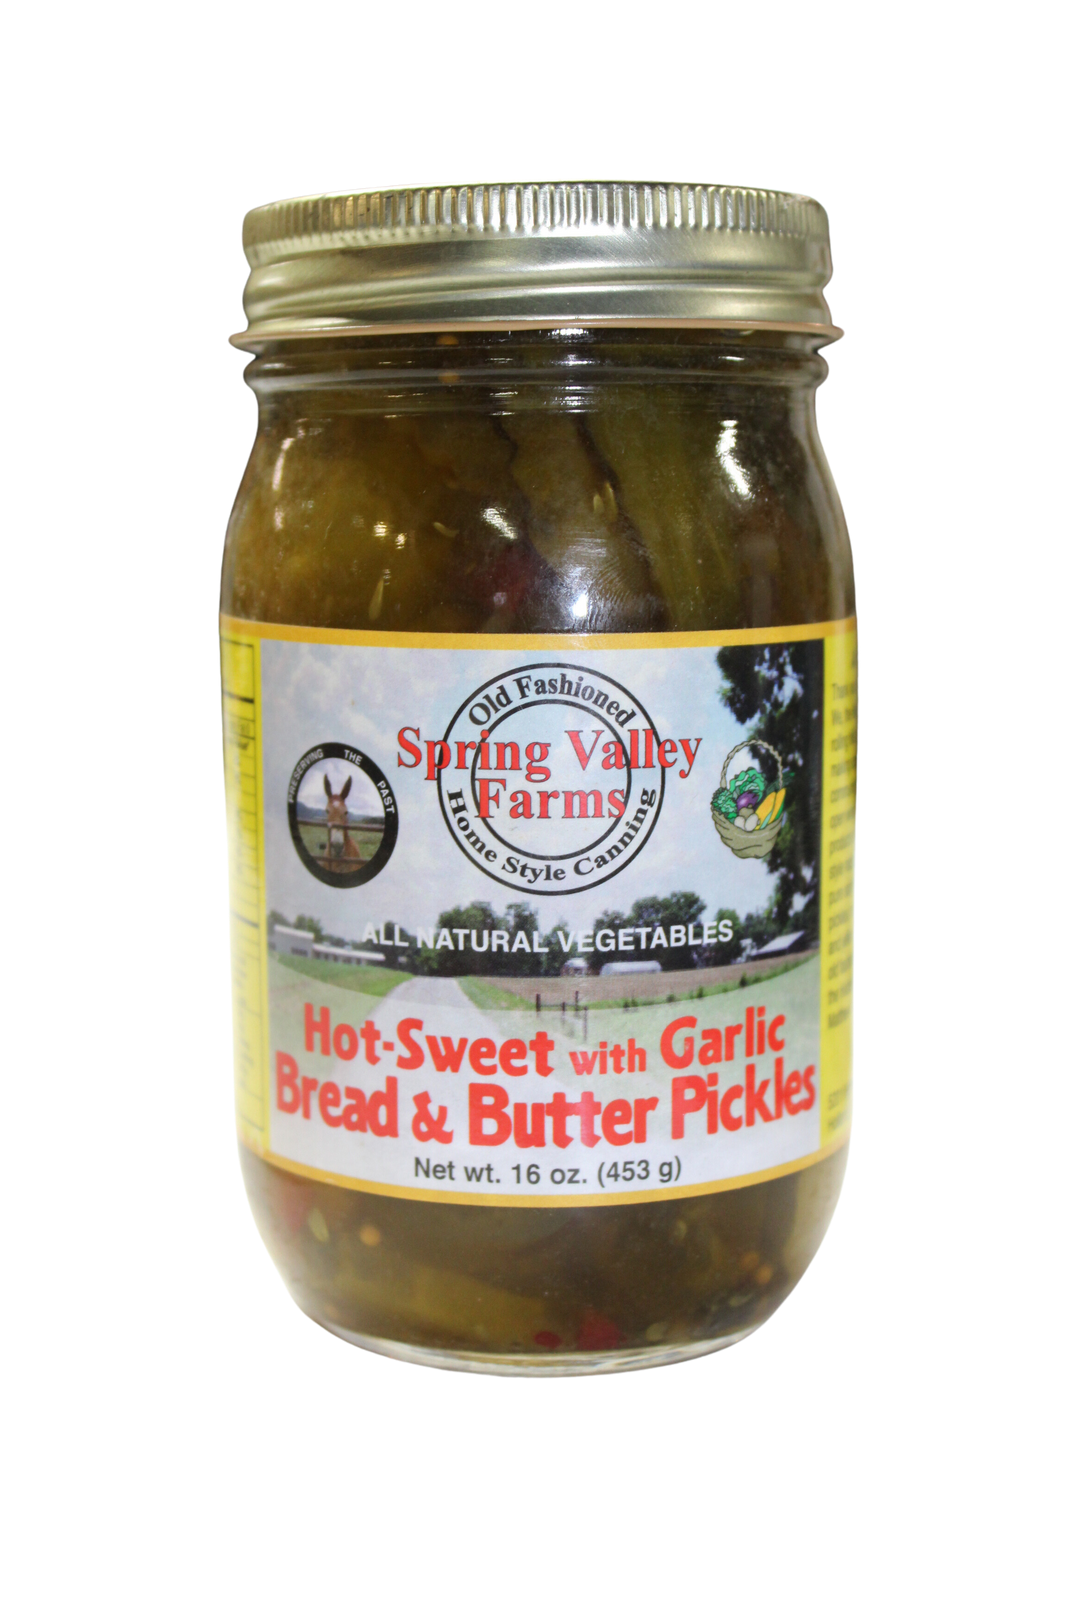 Spring Valley Farms Zesty with Garlic Sweet Bread and Butter Pickles